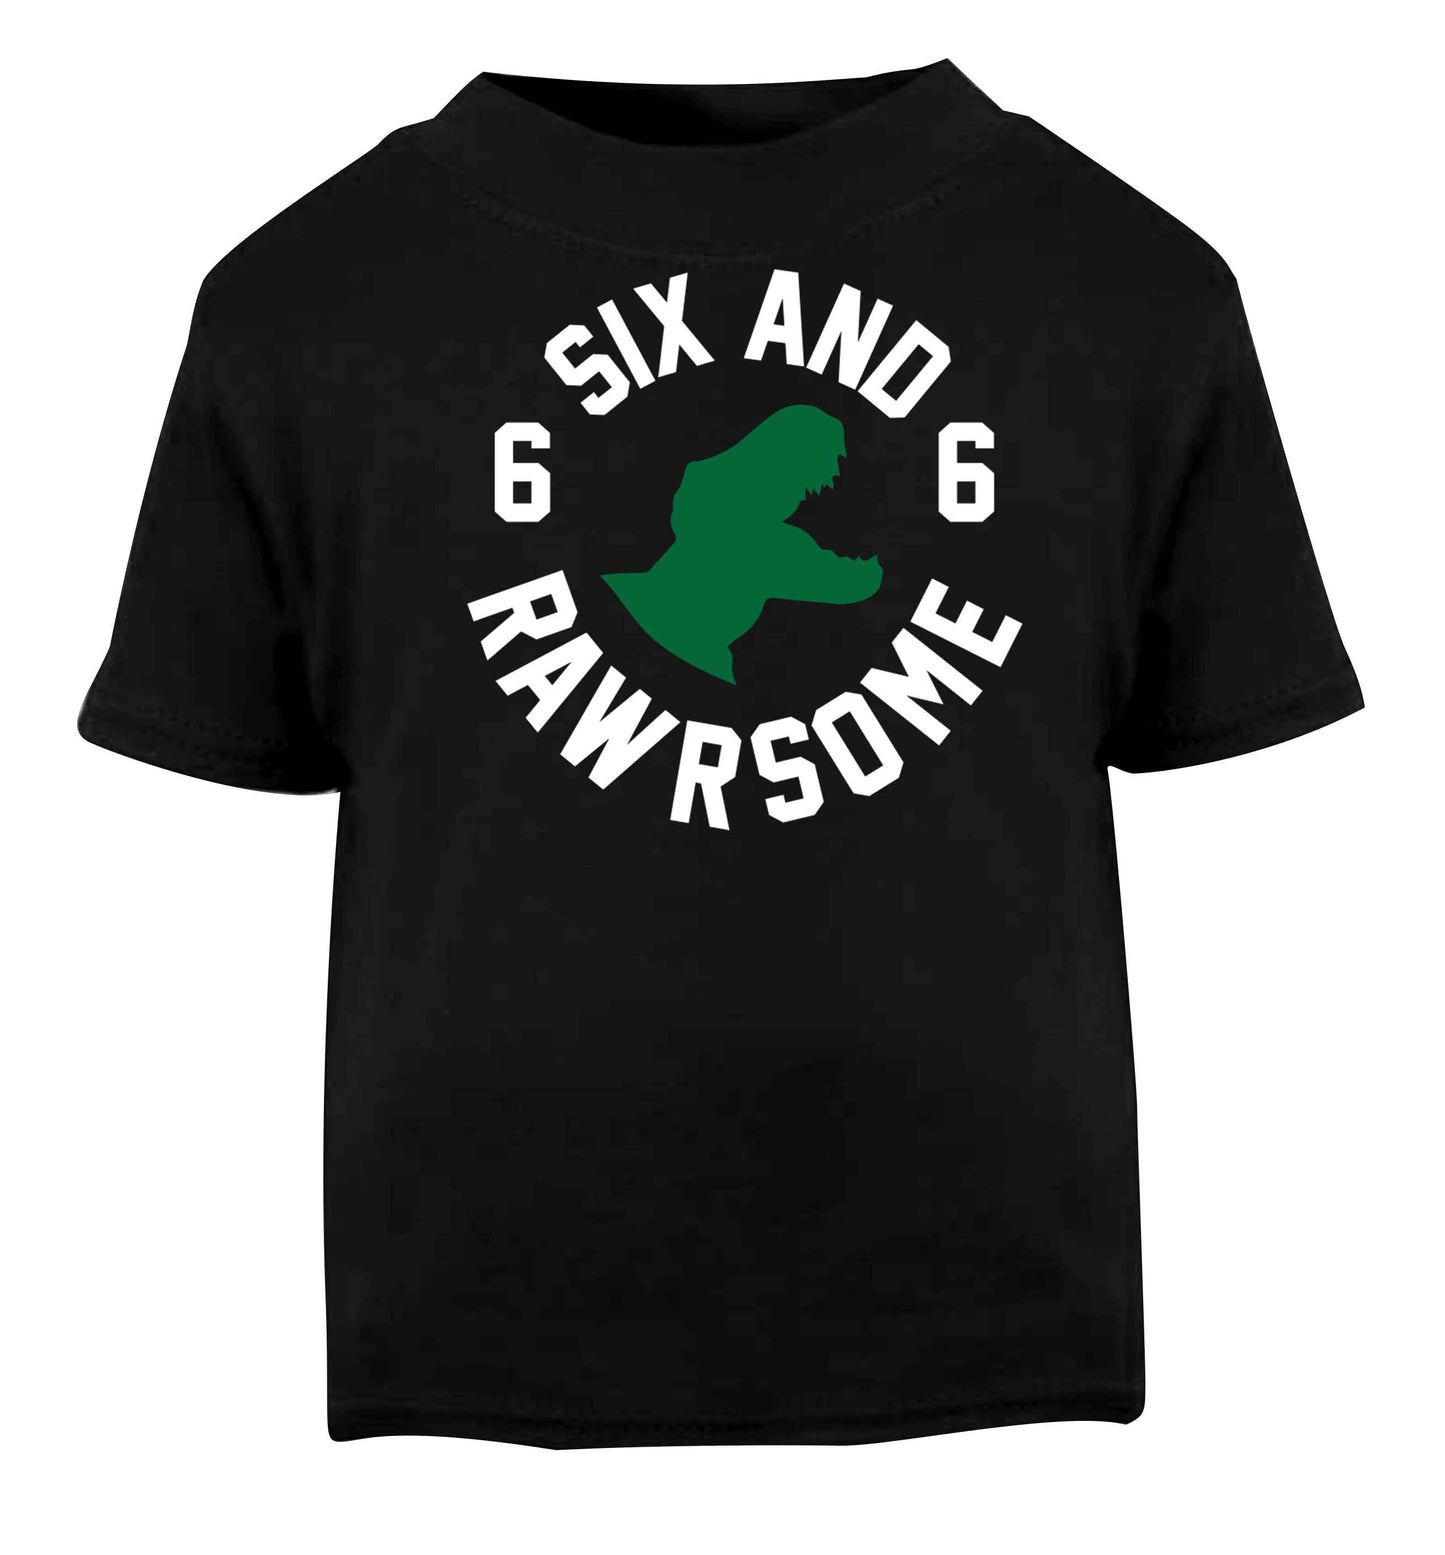 Six and rawrsome Black baby toddler Tshirt 2 years